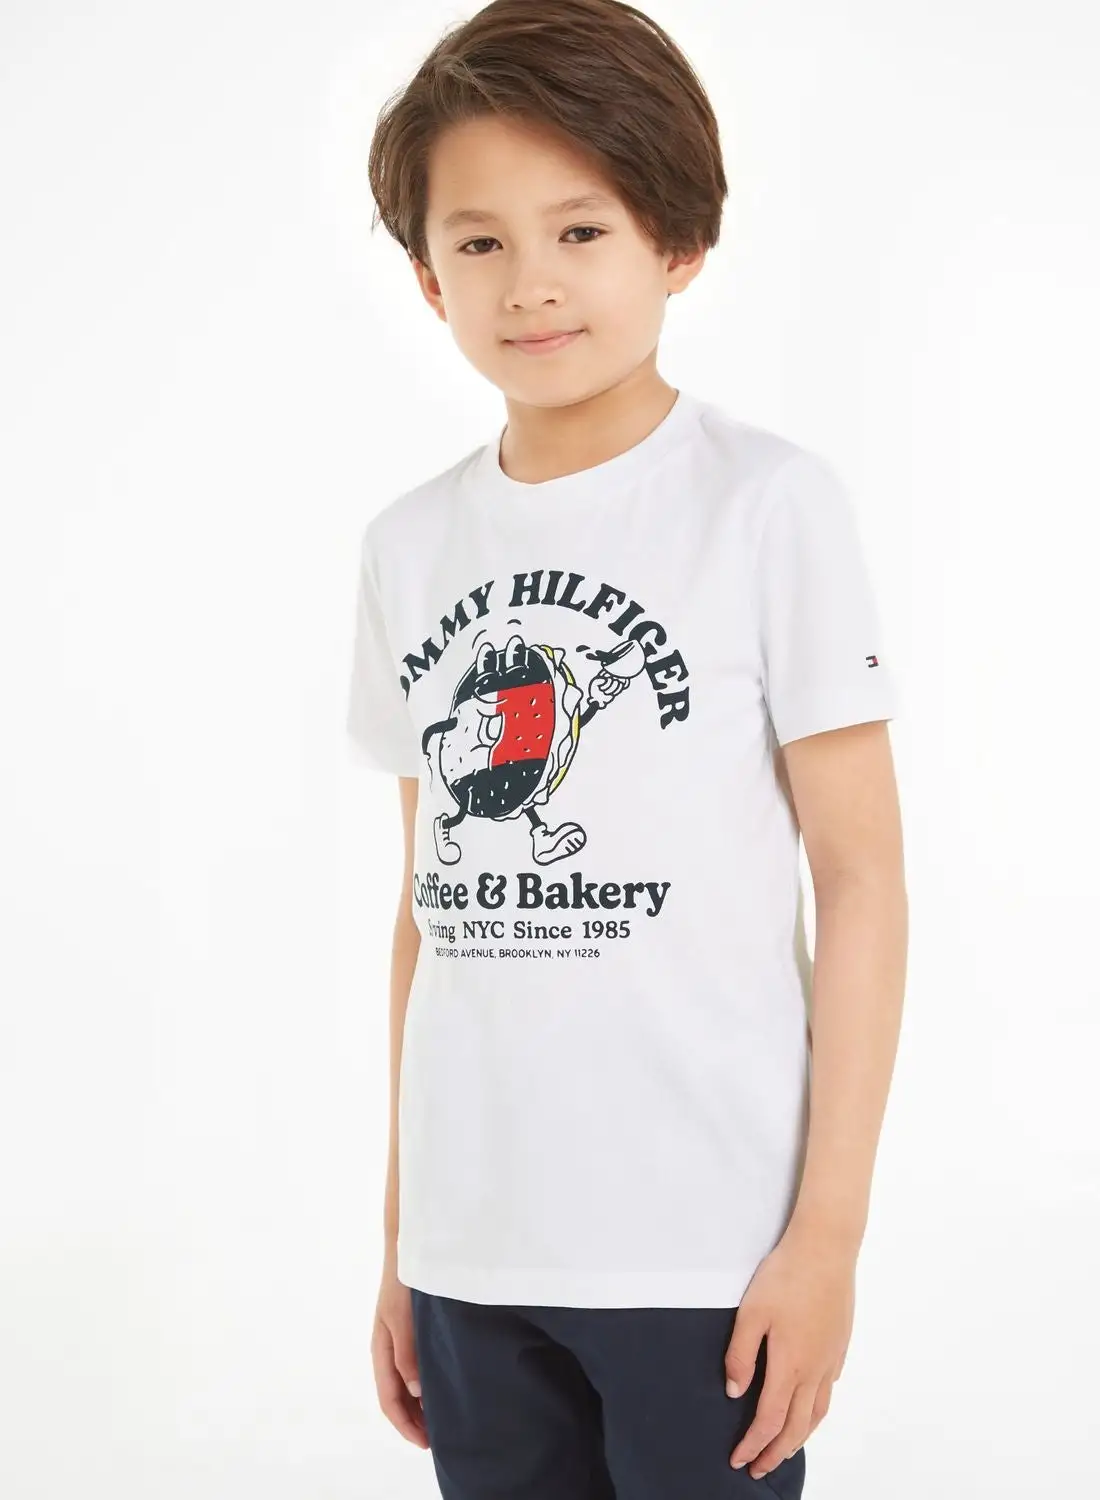 TOMMY HILFIGER Youth Graphic Print T-Shirt